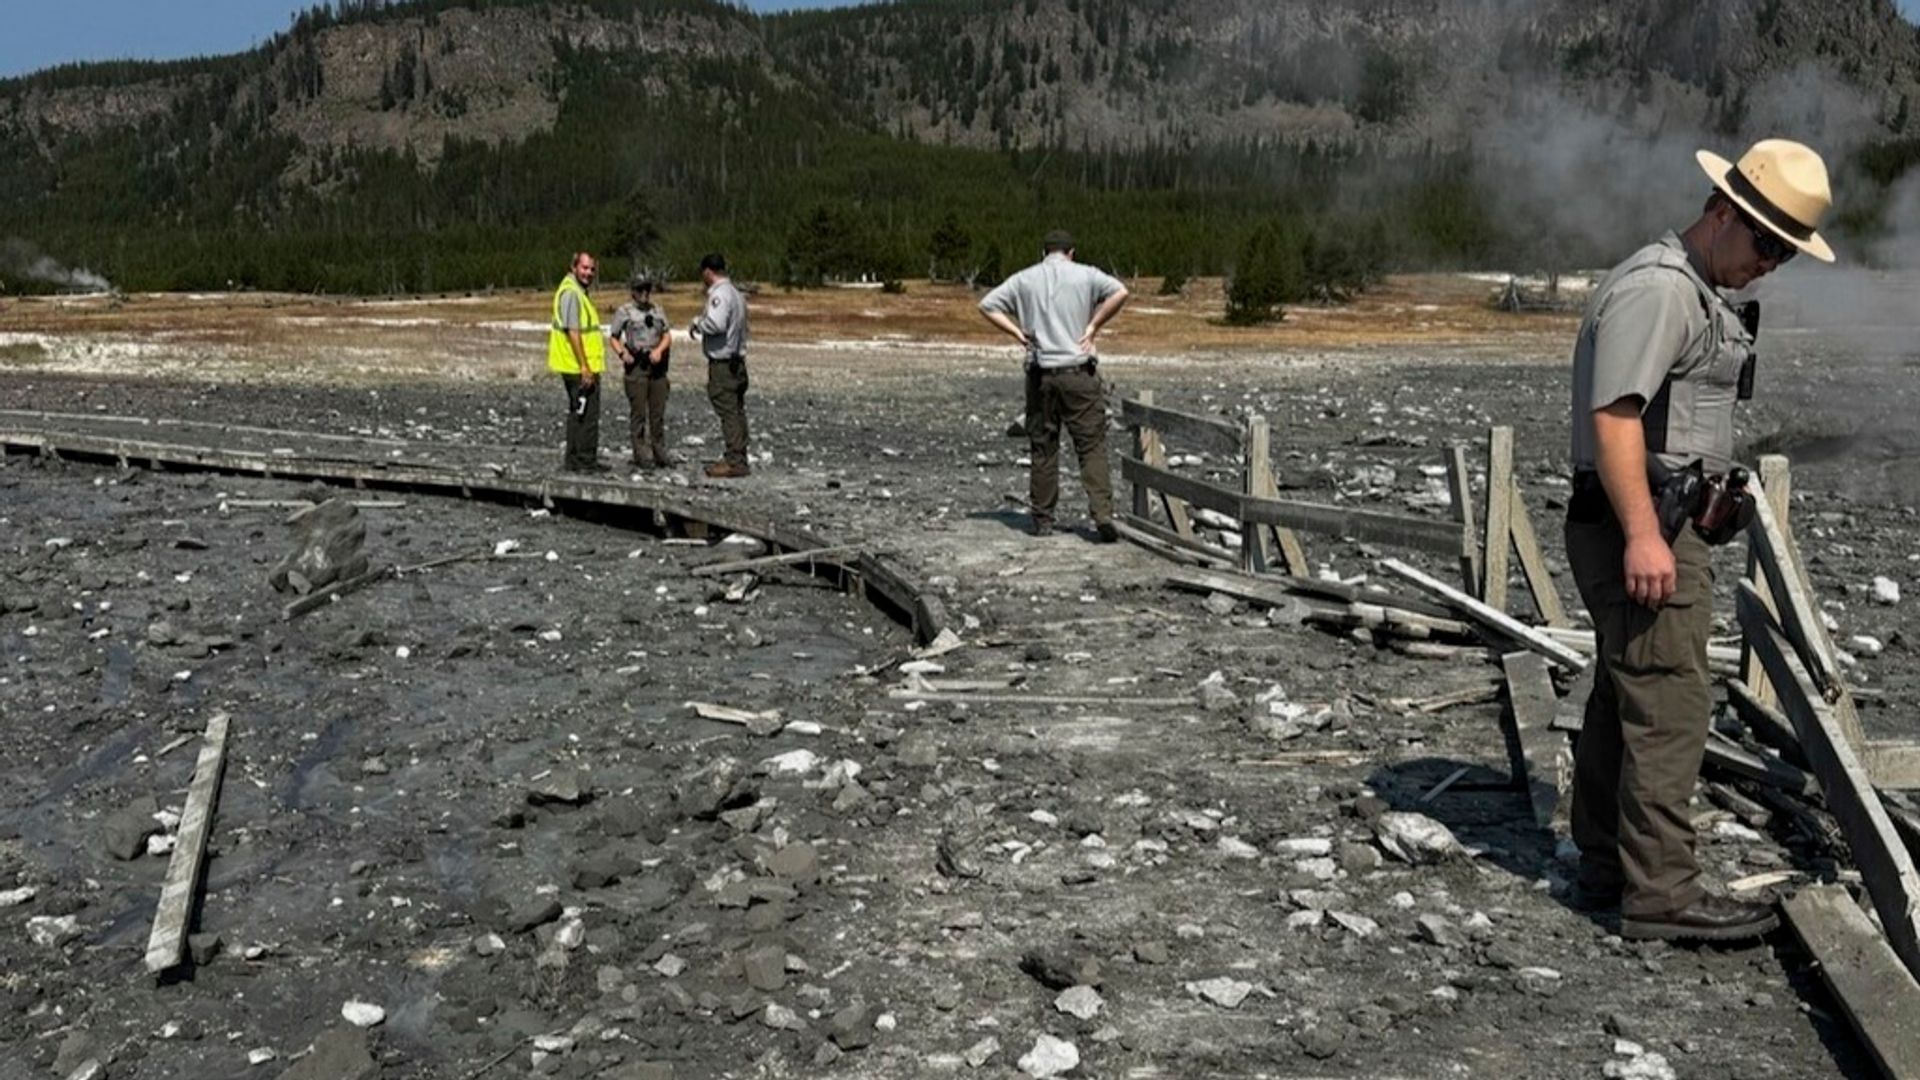 Explosion at Yellowstone forces tourists to run for safety